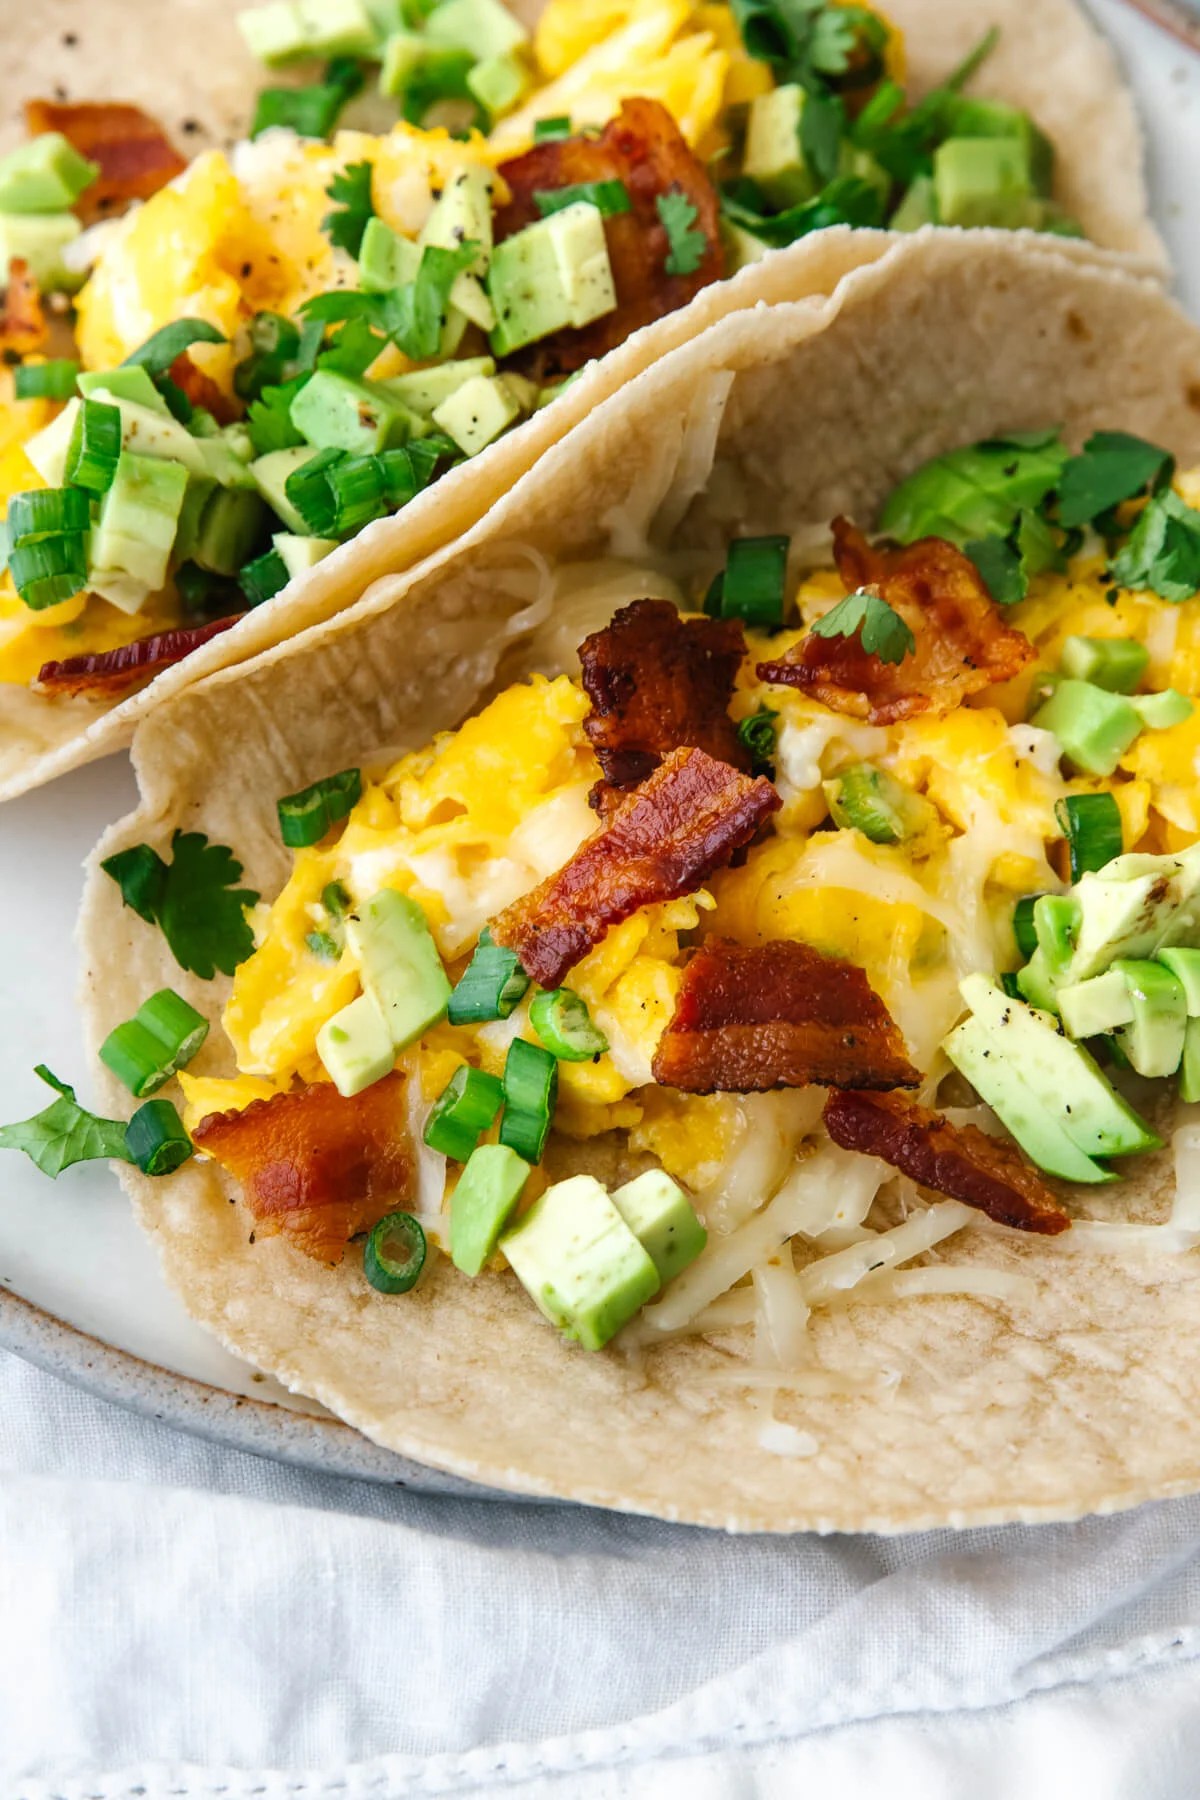 Breakfast tacos on a plate with a napkin.